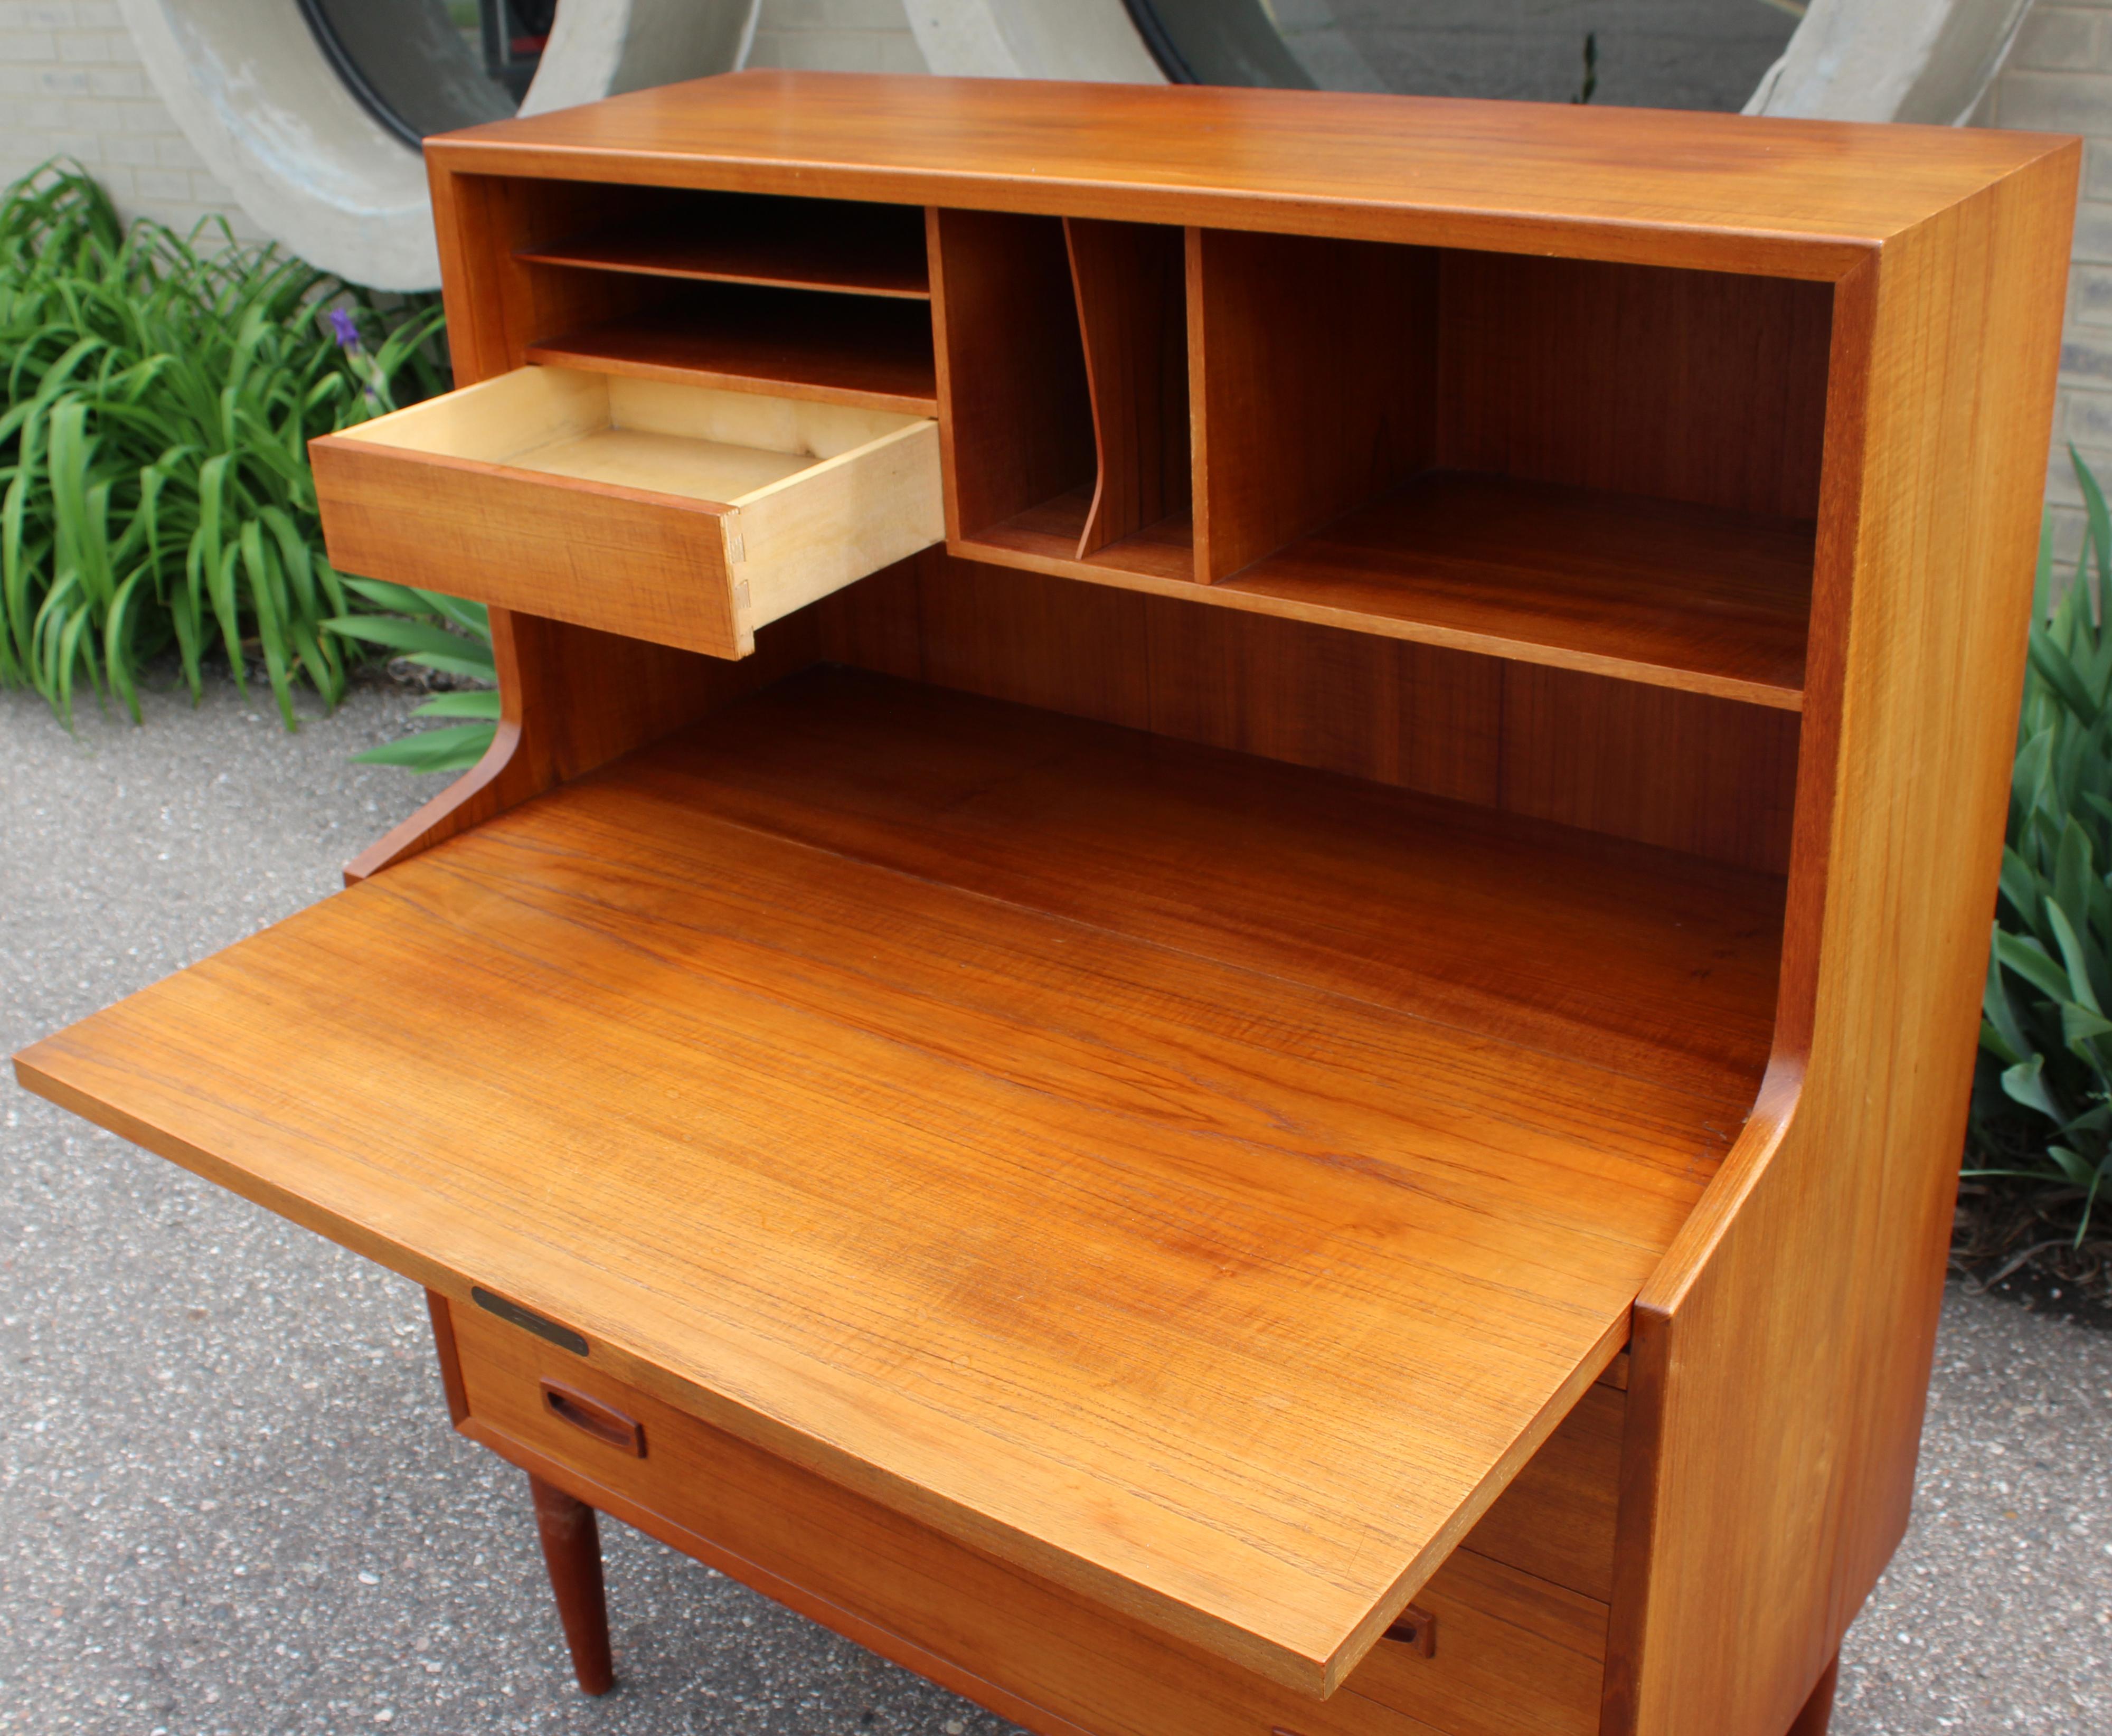 For your consideration is a magnificent, teak drop down desk secretary dresser made in Denmark, circa the 1960s. In excellent vintage condition. The dimensions are 35.5